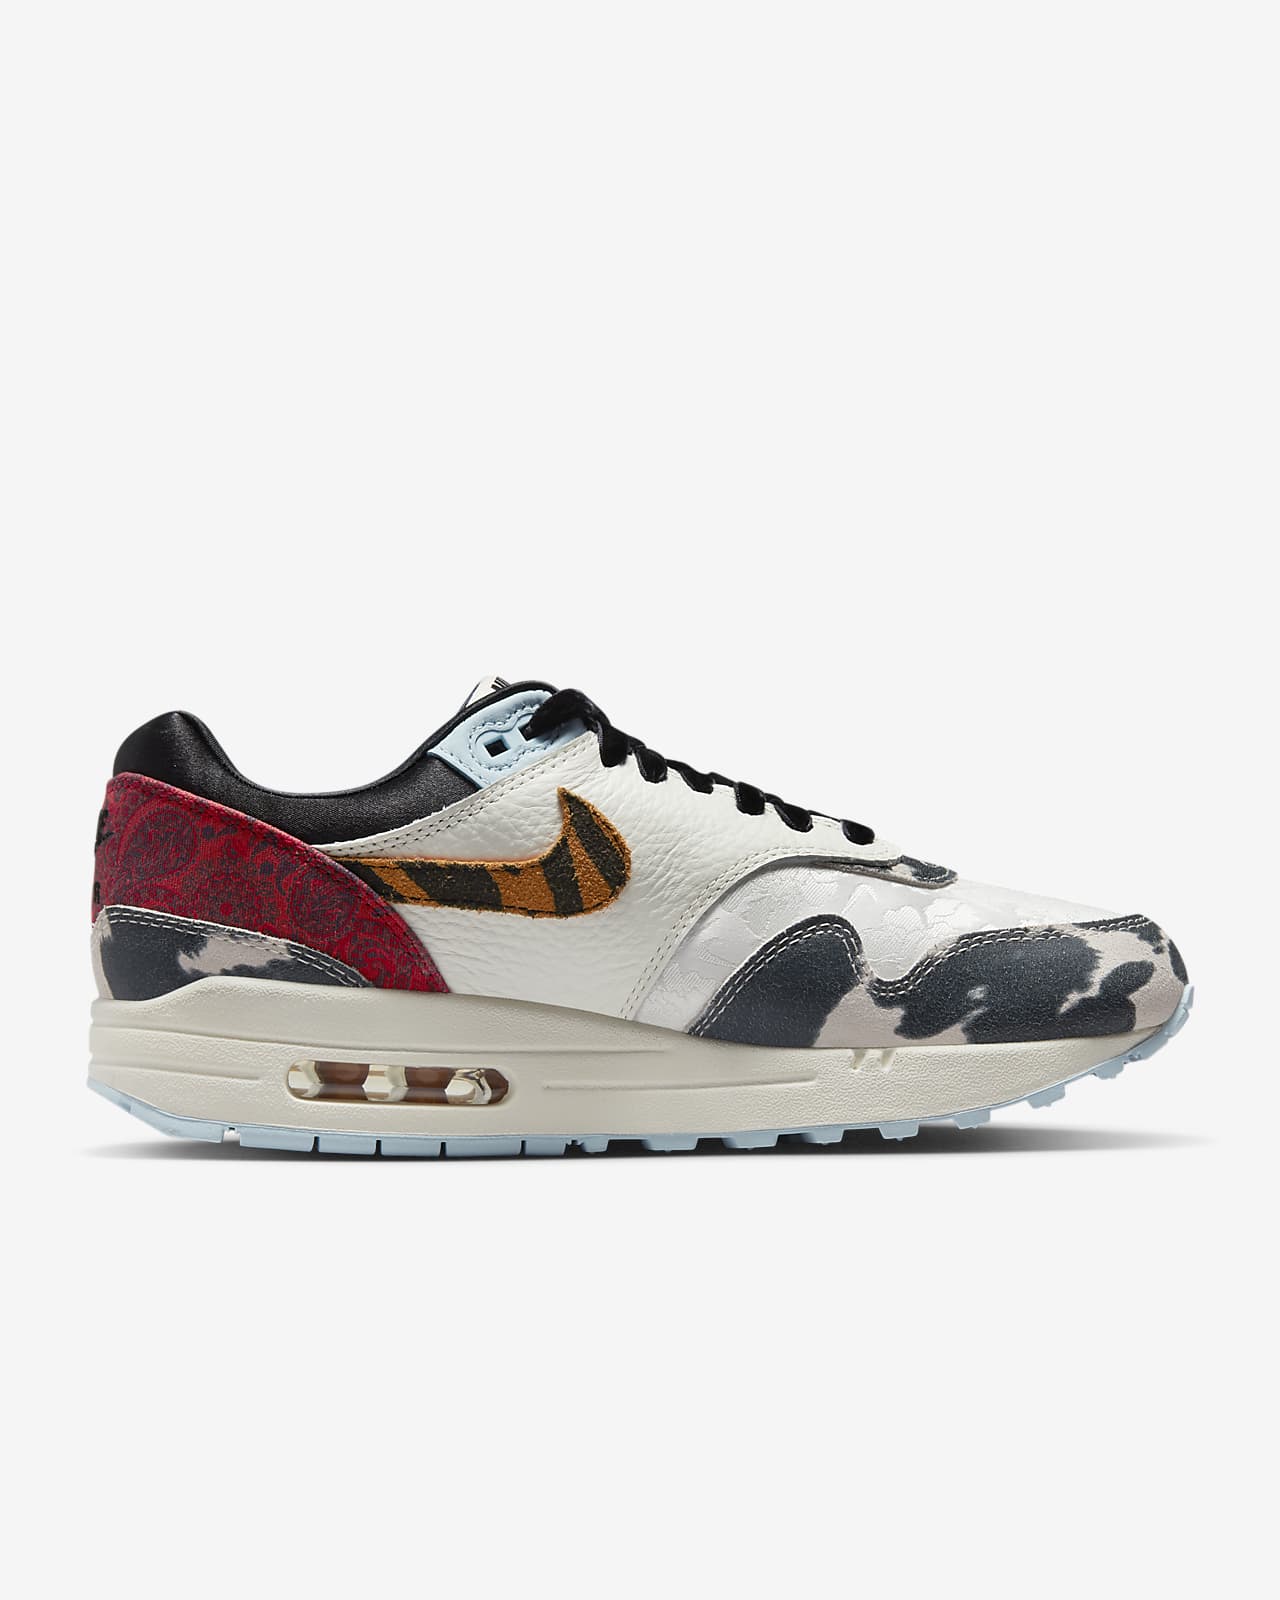 Air Max 1 '87 Shoes. IN